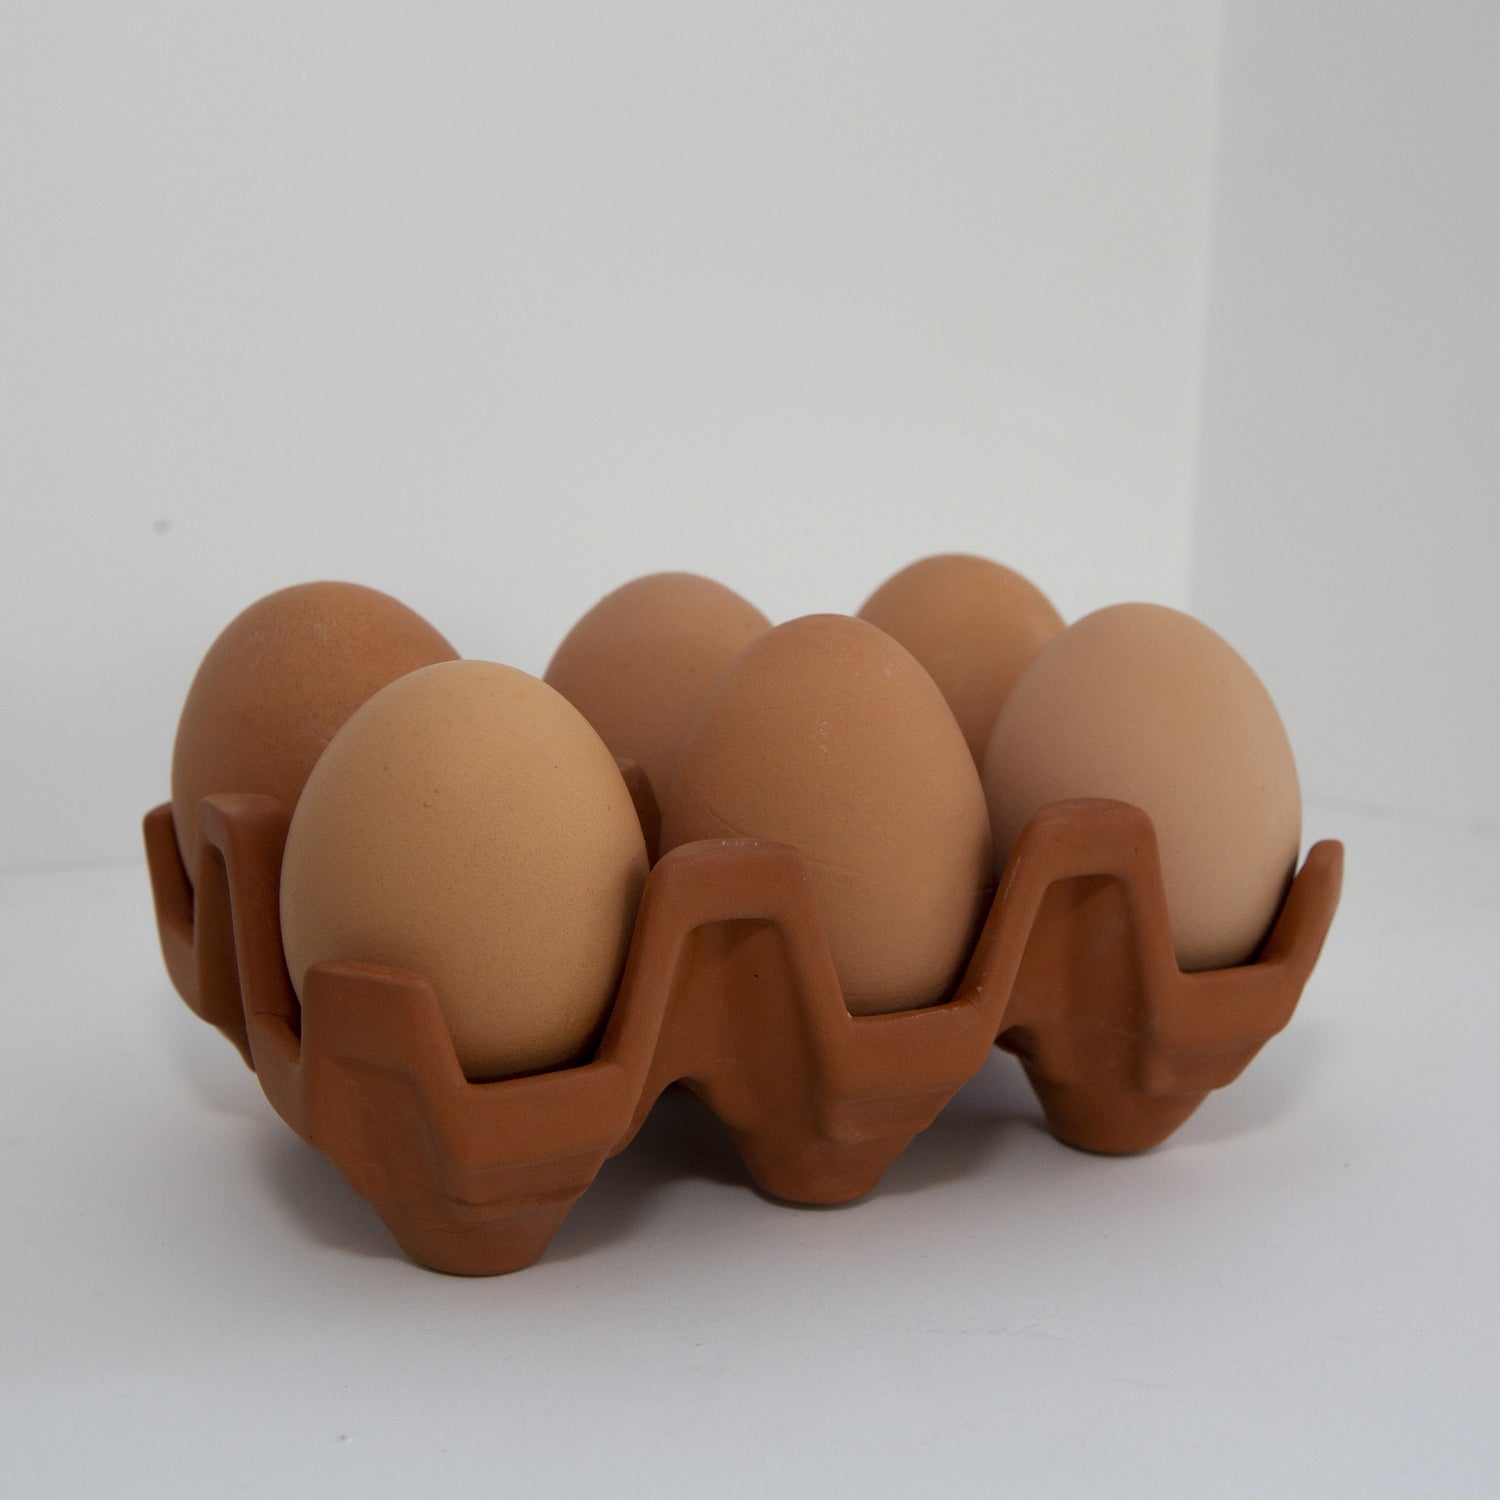 Terracotta egg racks are an ideal way to store your eggs .Designed from the traditional cardboard trays. Holds 6 eggs 
Designer: KDT 
Product Measurement: 5.5